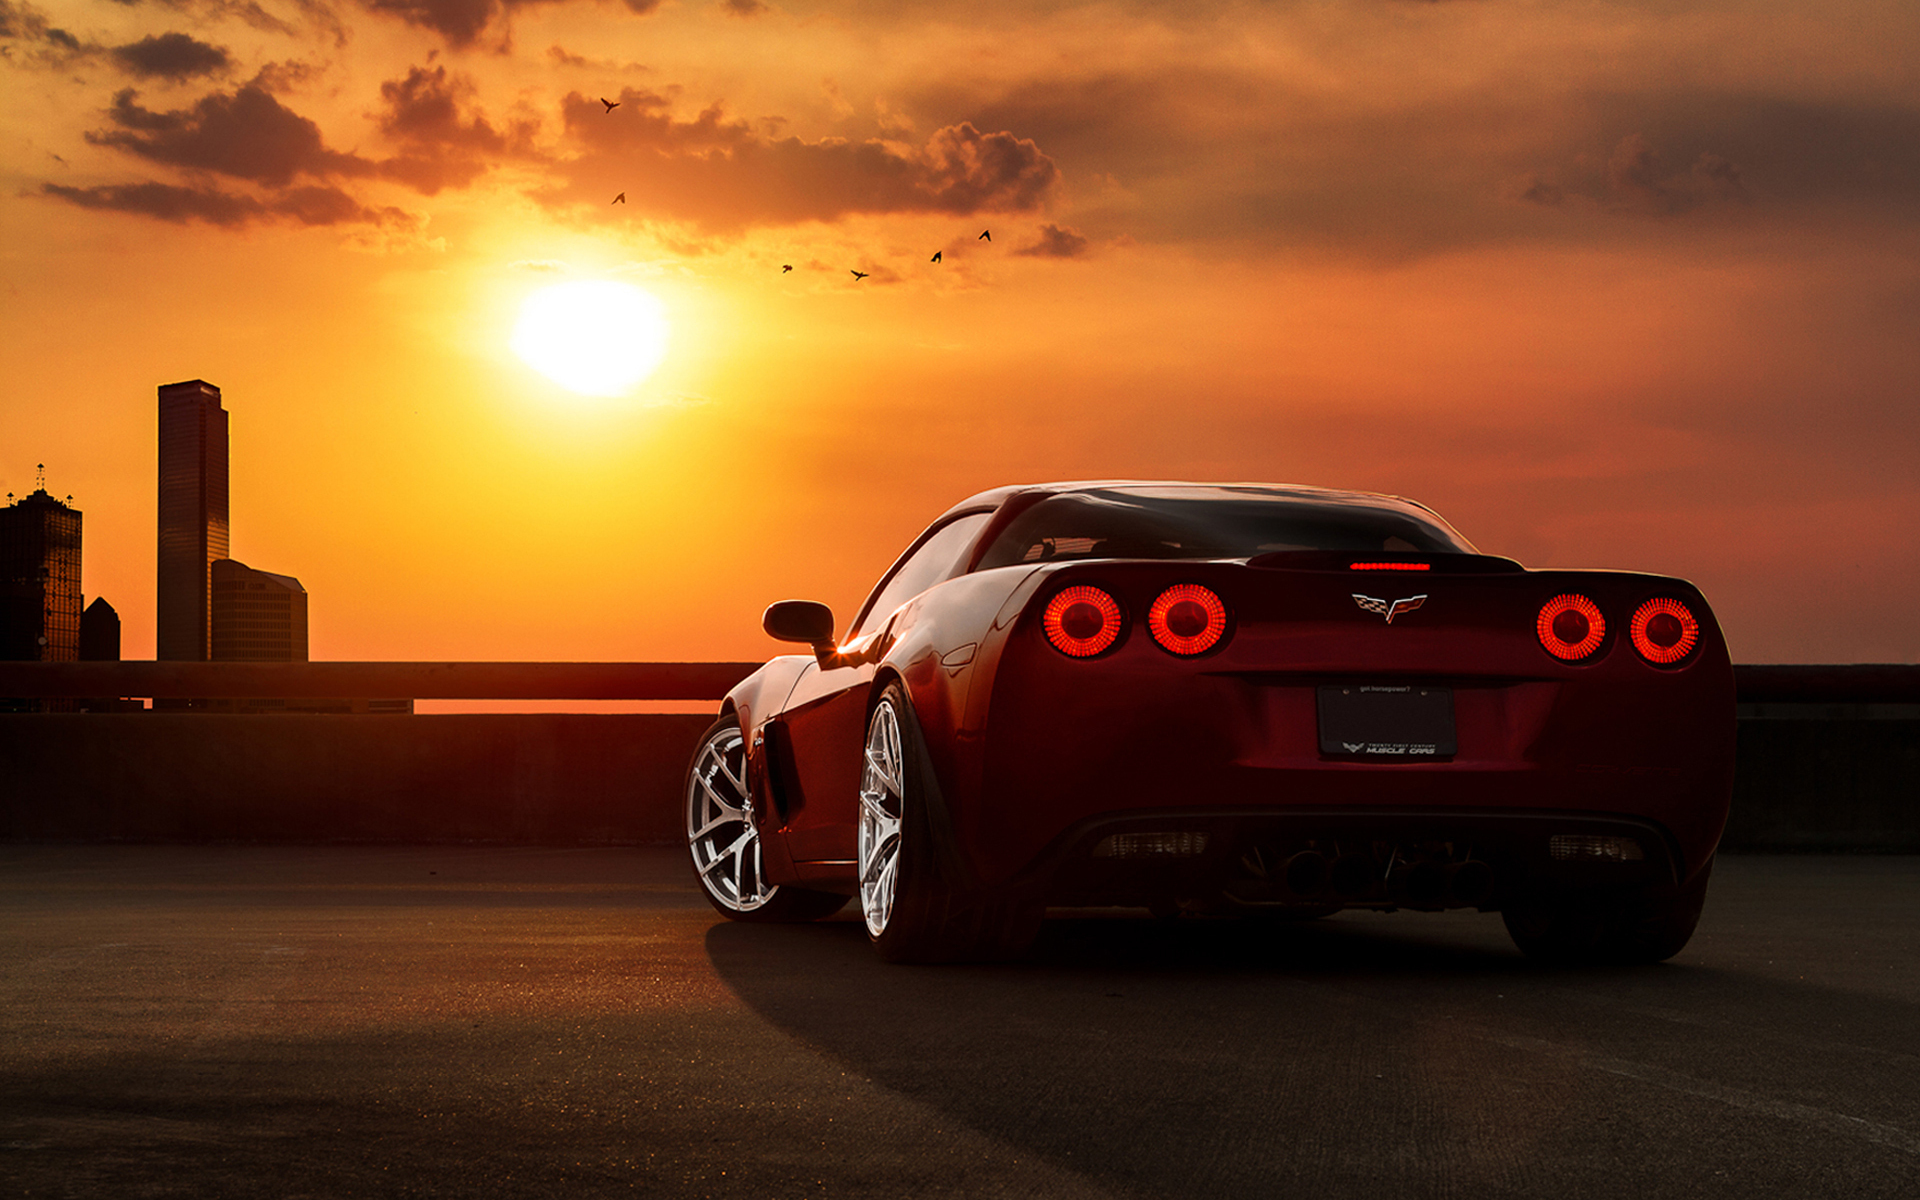 Chevrolet HD Wallpaper | Background Image | 1920x1200